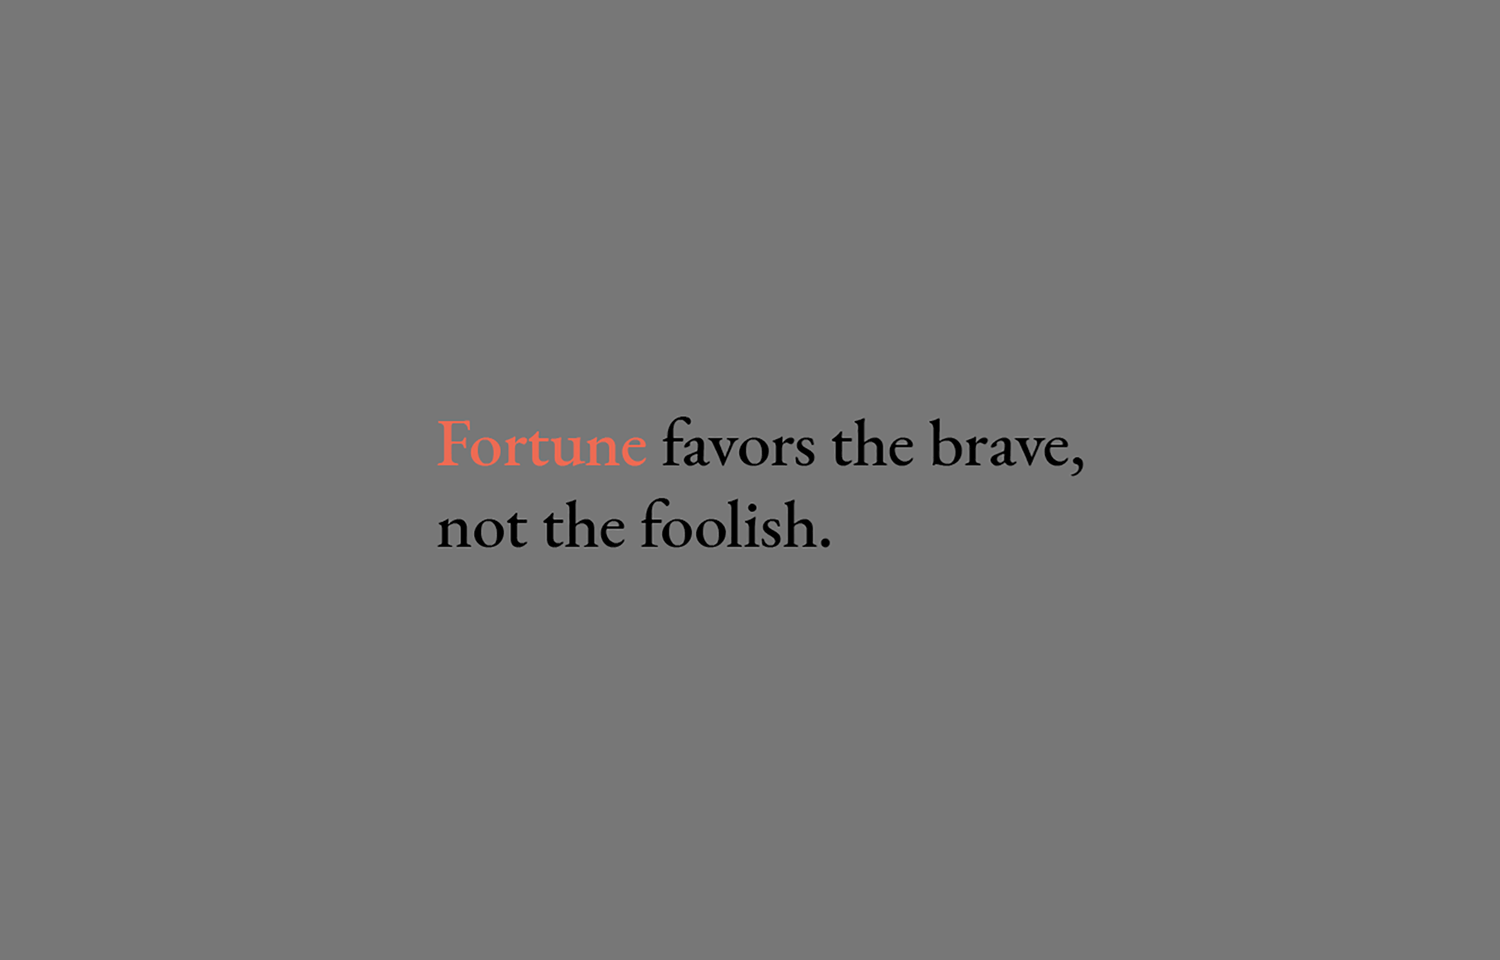 Fortune favors the brave, not the foolish.